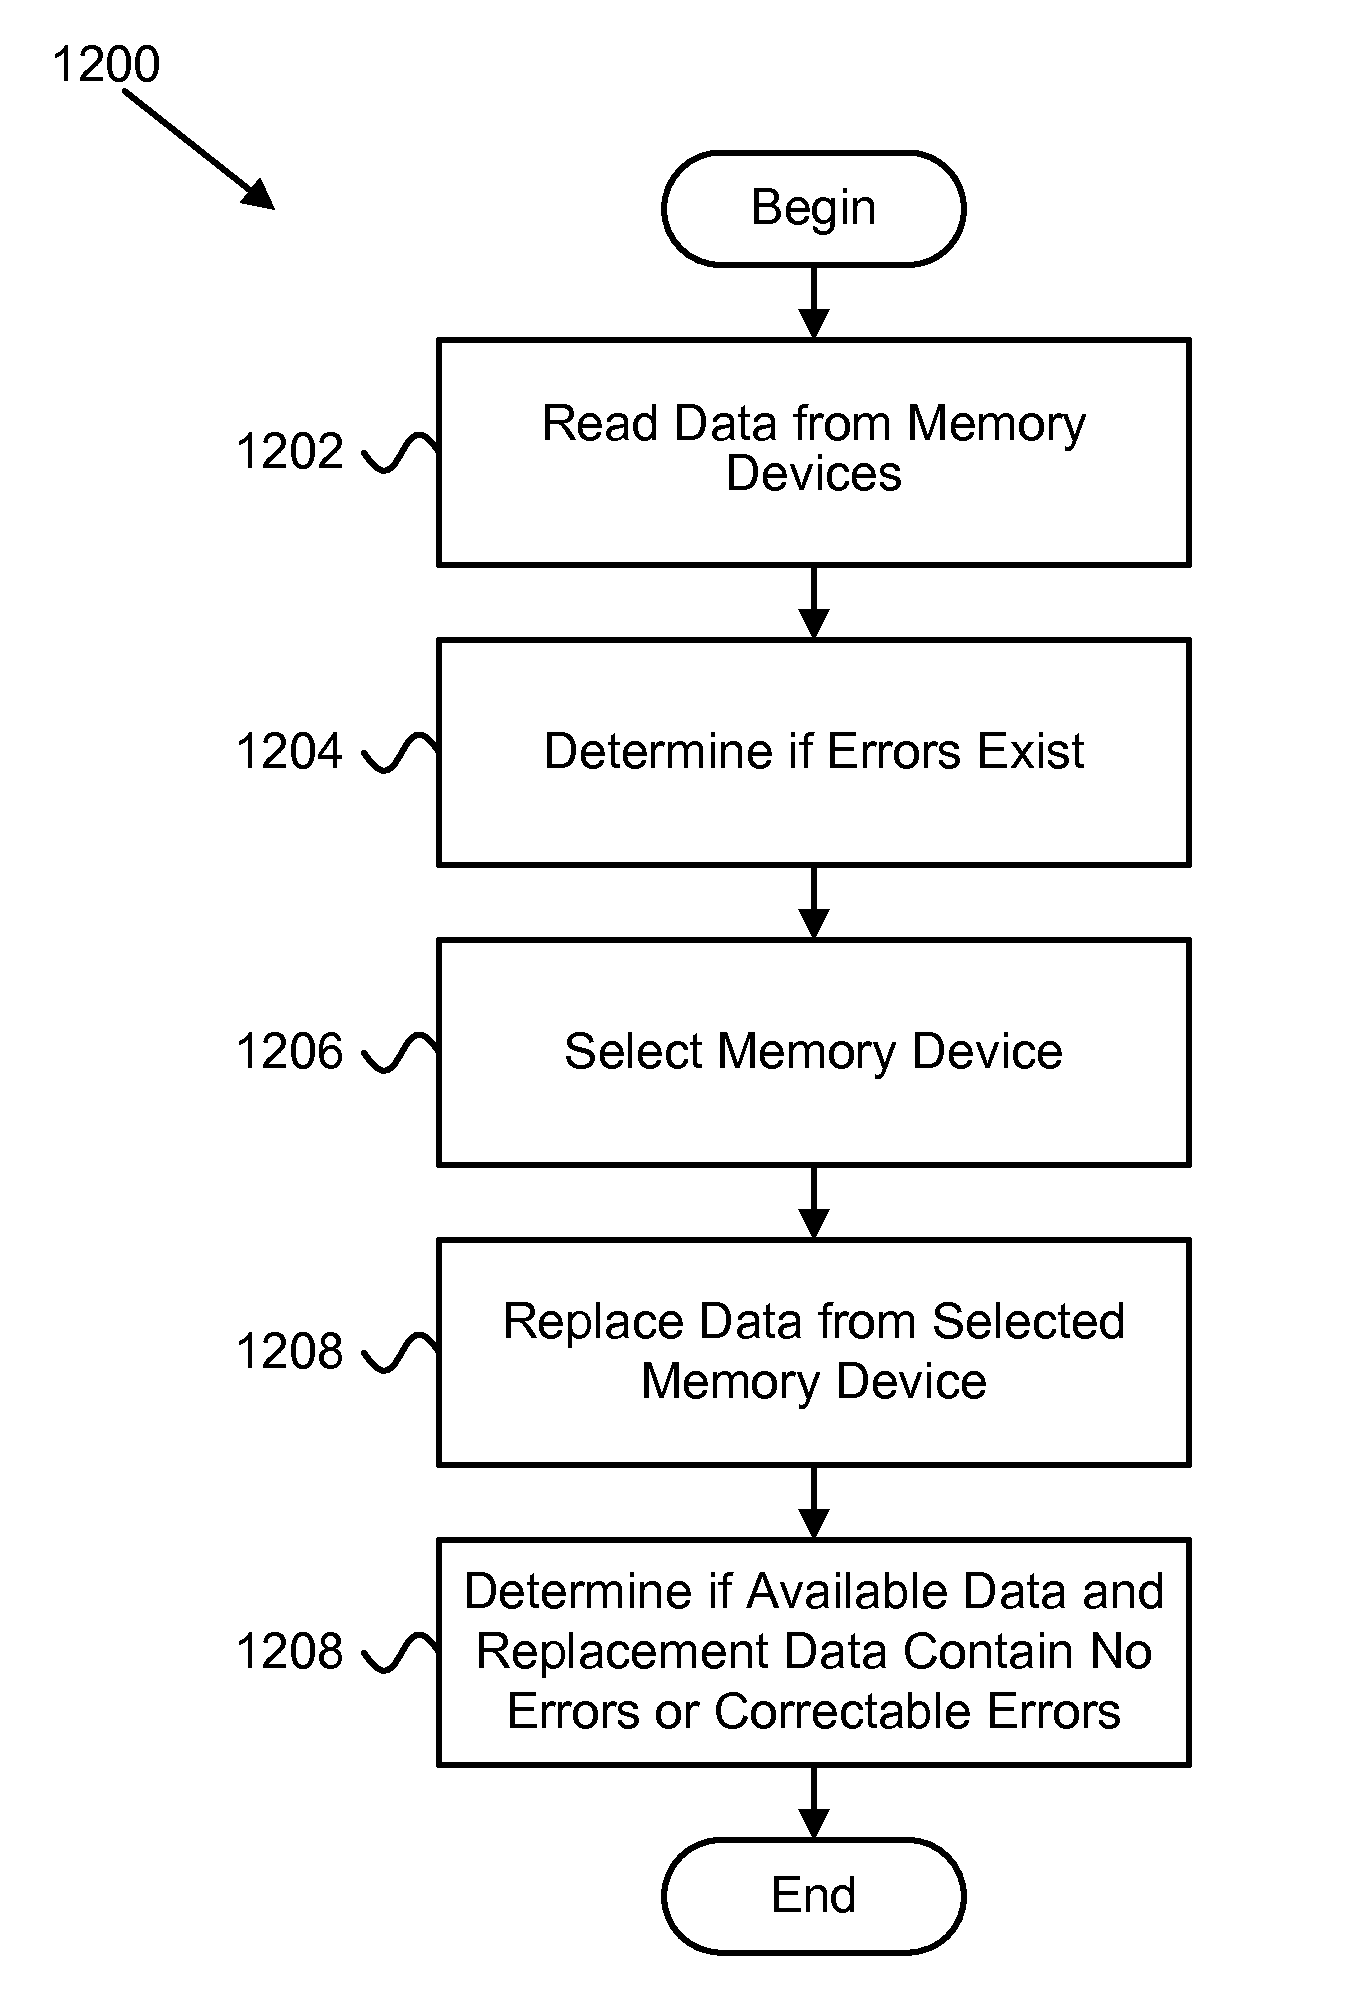 Apparatus, system, and method to increase data integrity in a redundant storage system